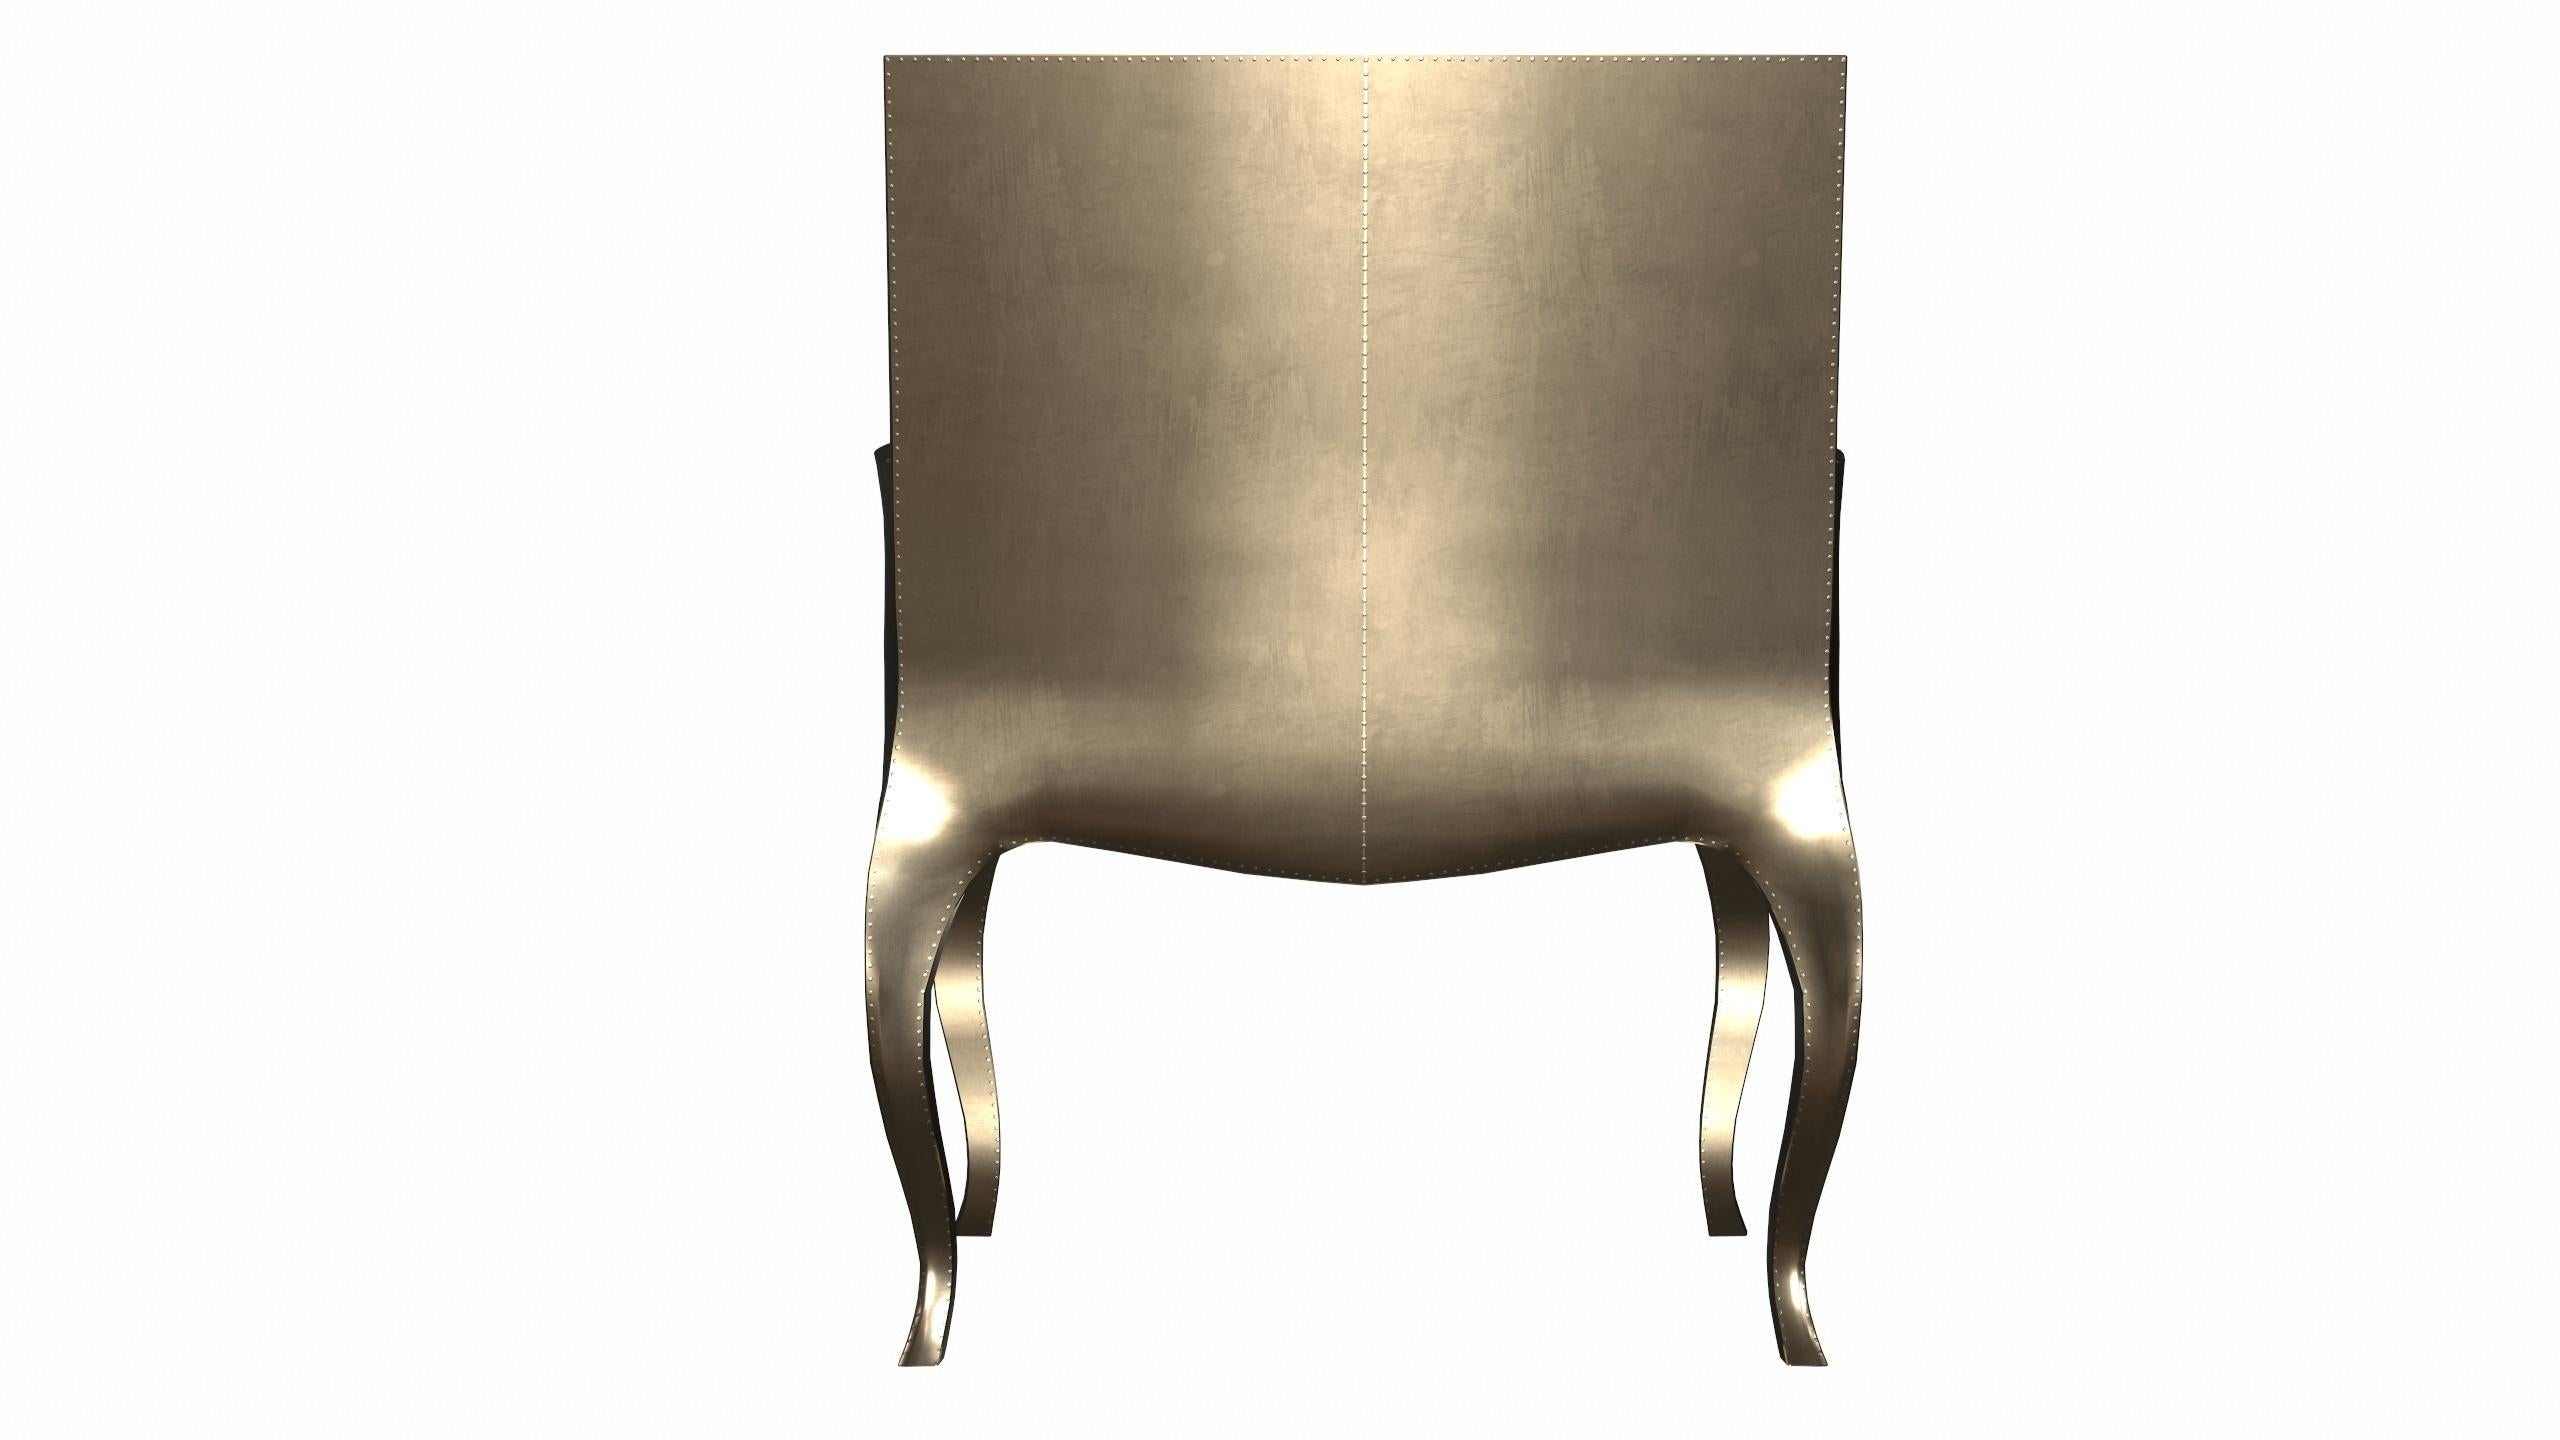 Art Deco Style Chairs in Smooth Brass by Paul Mathieu for S. Odegard For Sale 1